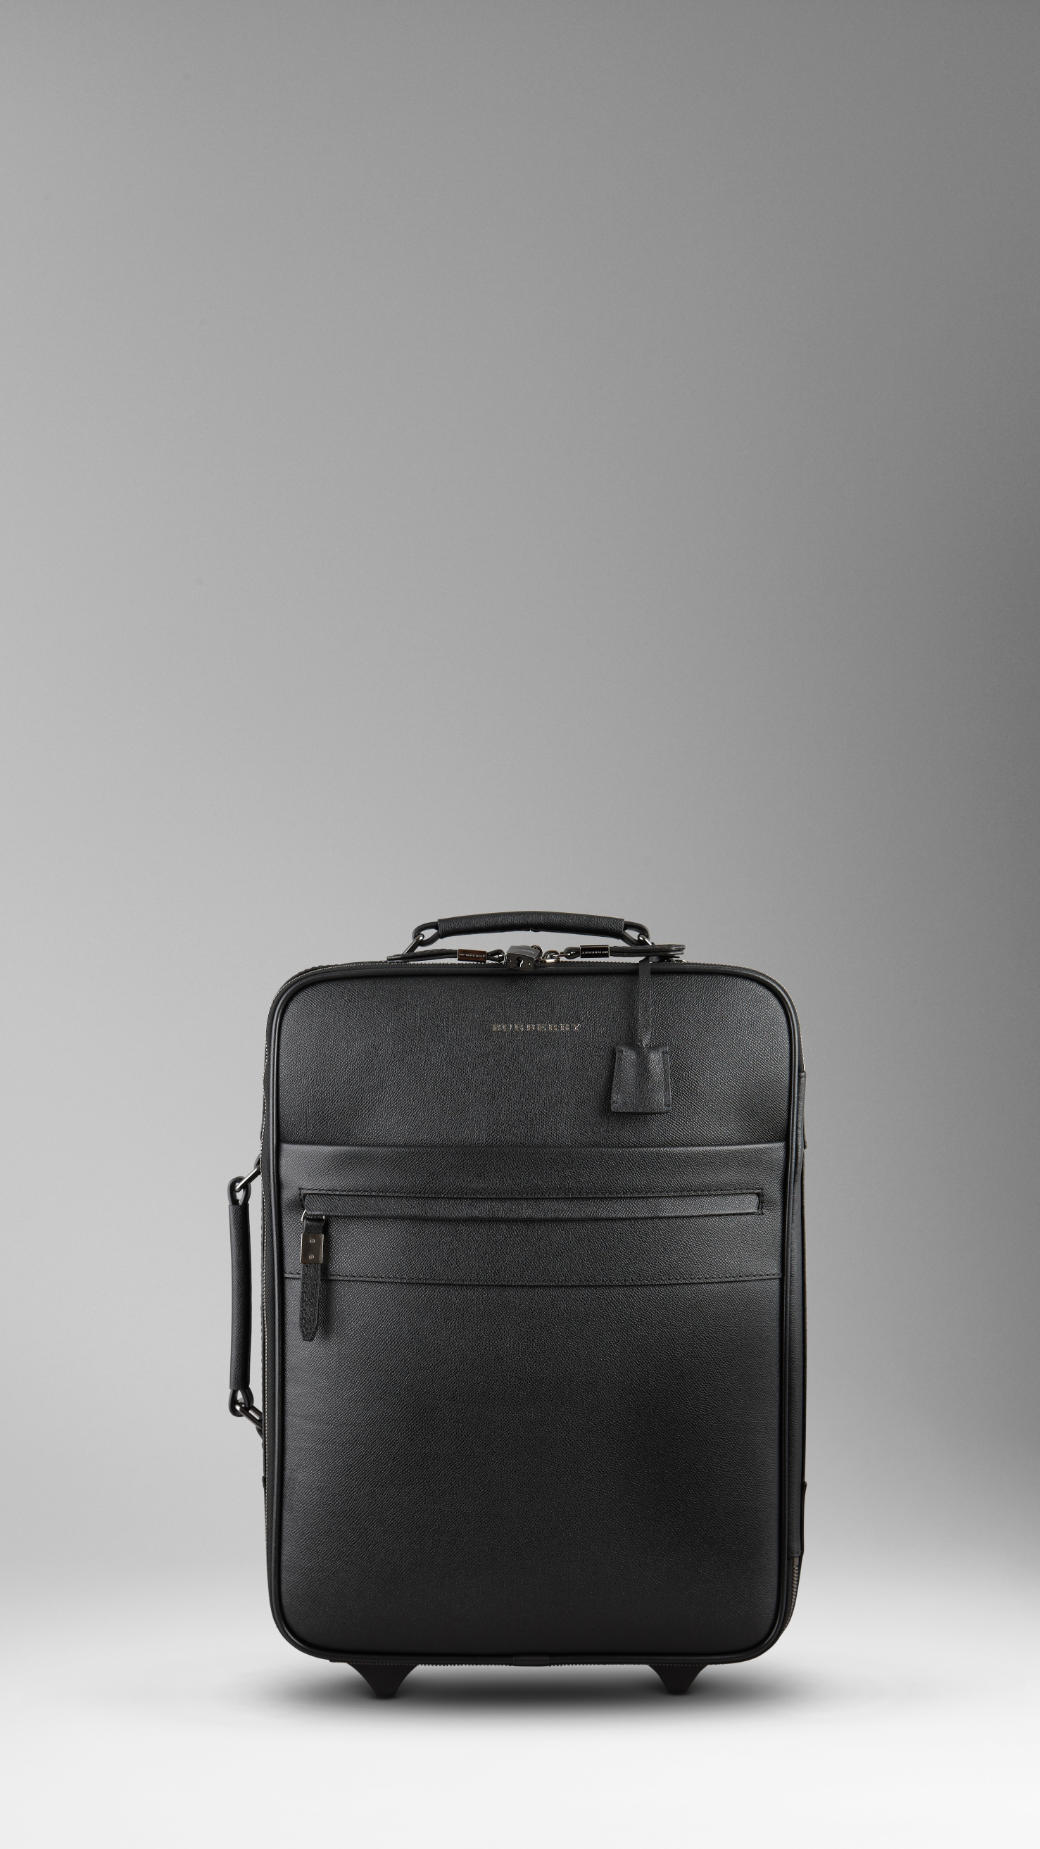 Burberry Leather Carry On Suitcase in Black for Men